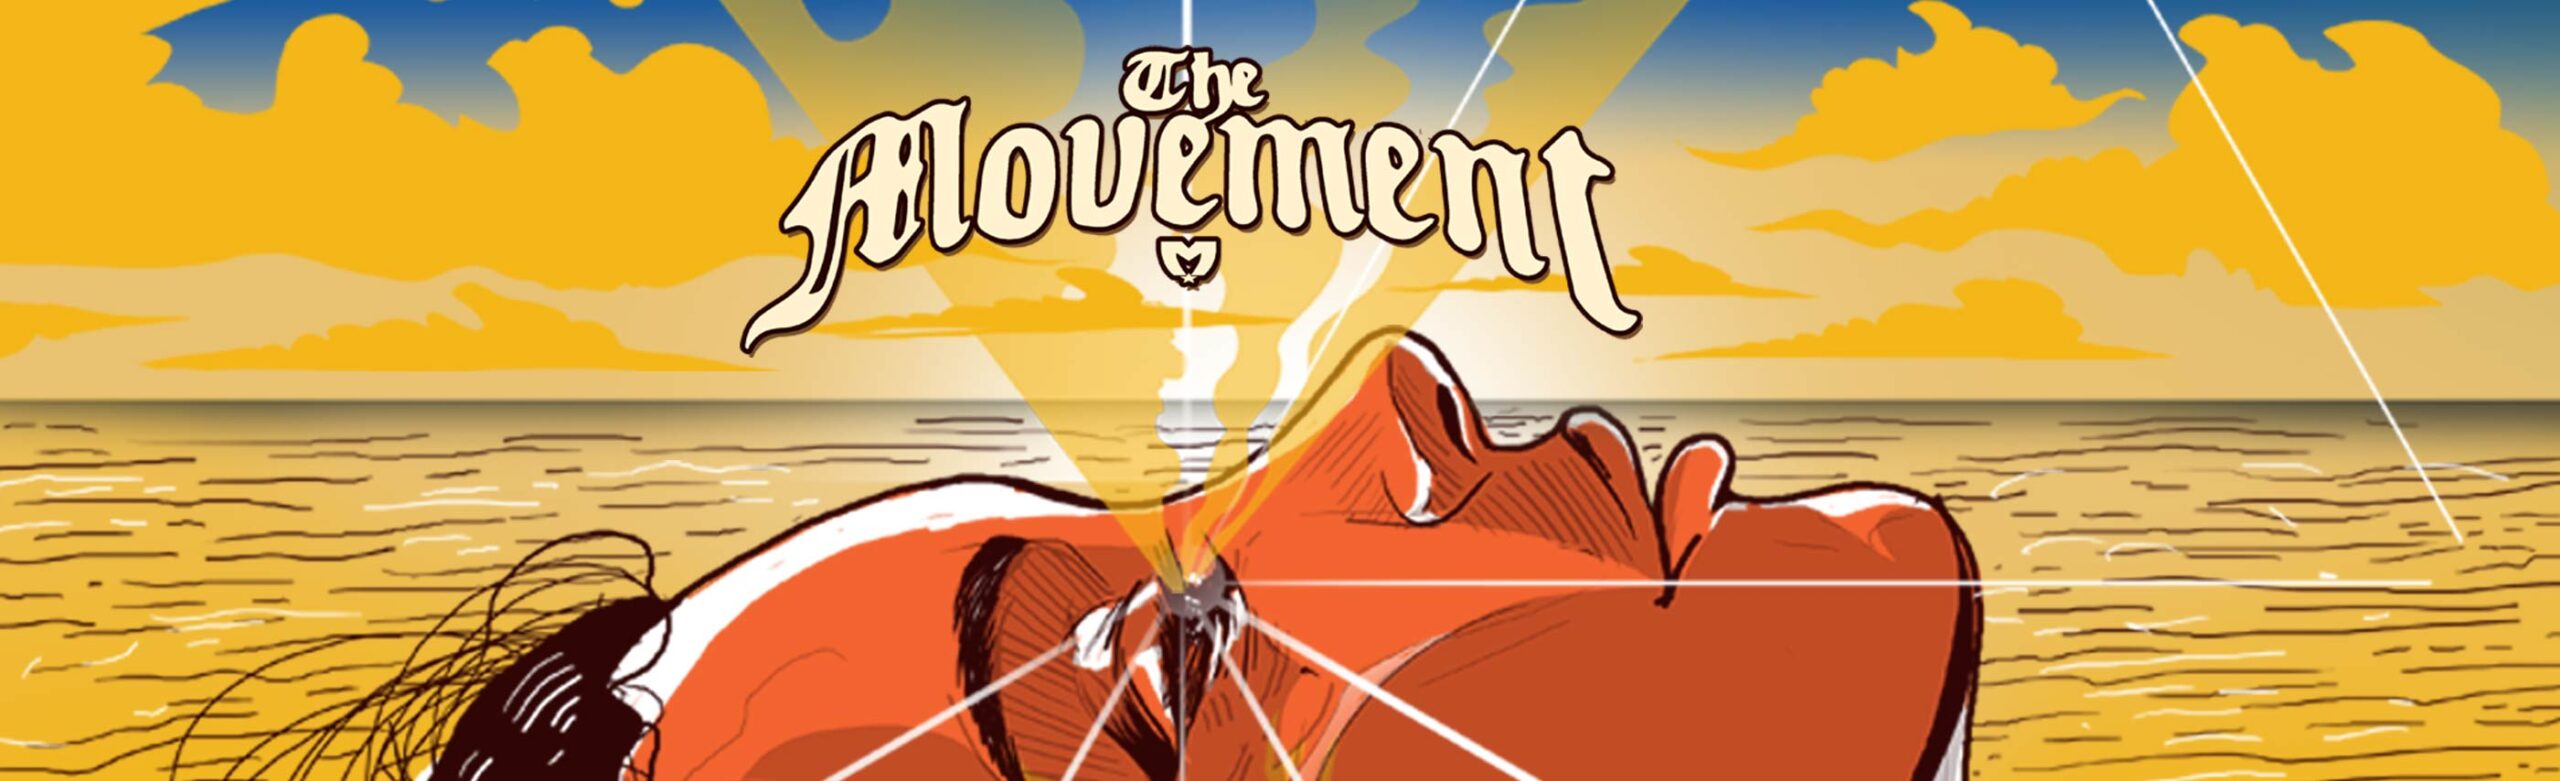 The Movement Announce Concerts in Bozeman and Missoula with Long Beach Dub Allstars & aurorawave Image